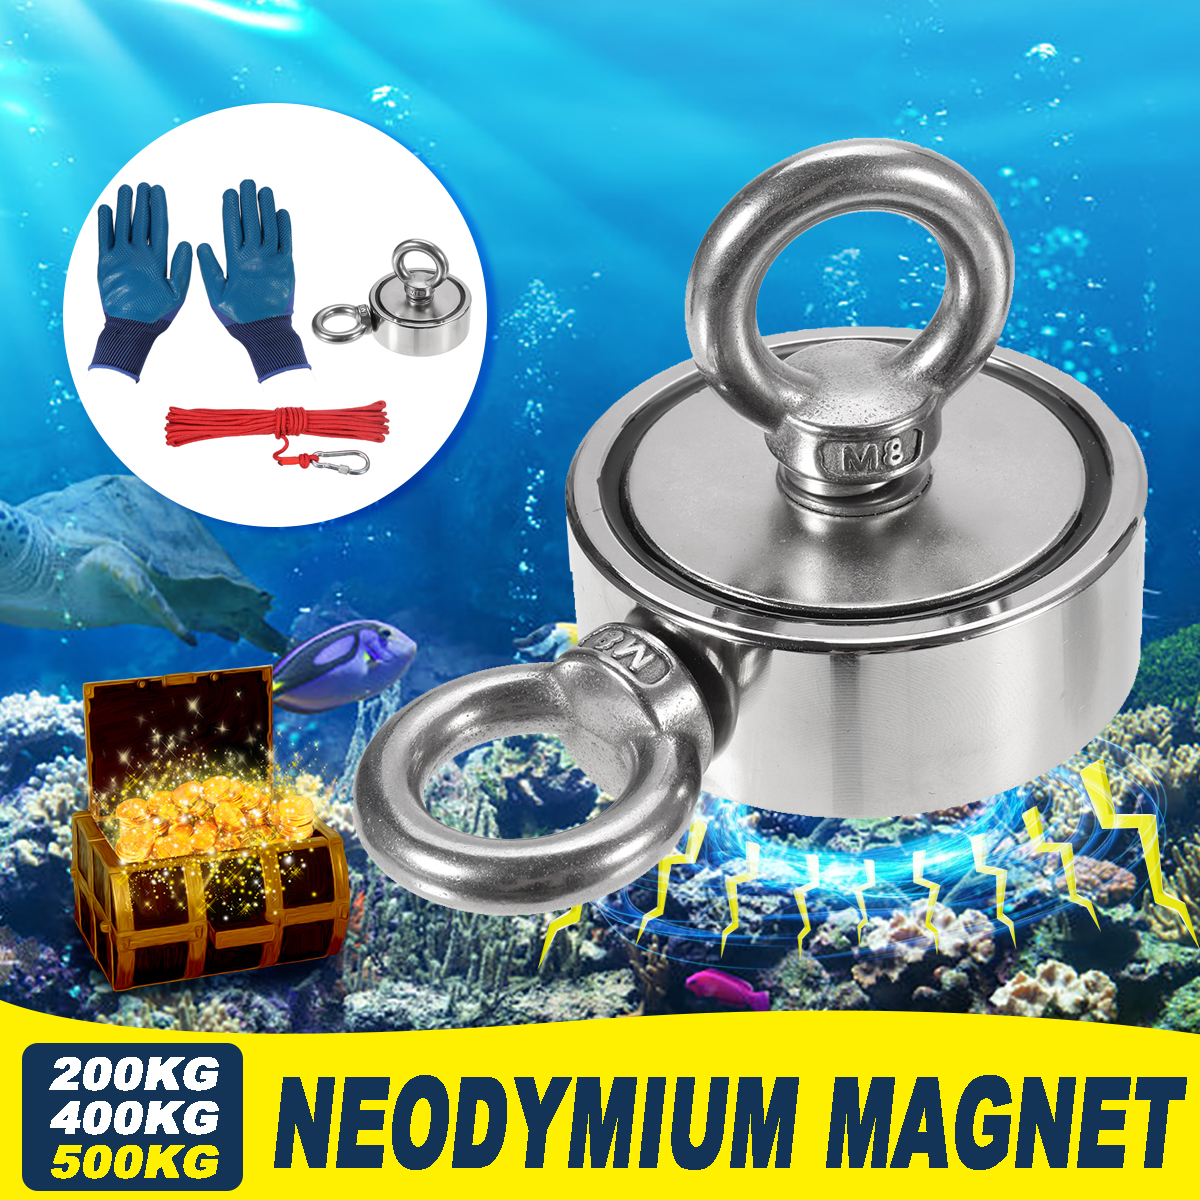 HNM486067mm-Double-Side-Strong-Neodymium-Fishing-Magnet-Set-With-10m-Rope-And-Gloves-Fishing-Tools-1725384-1